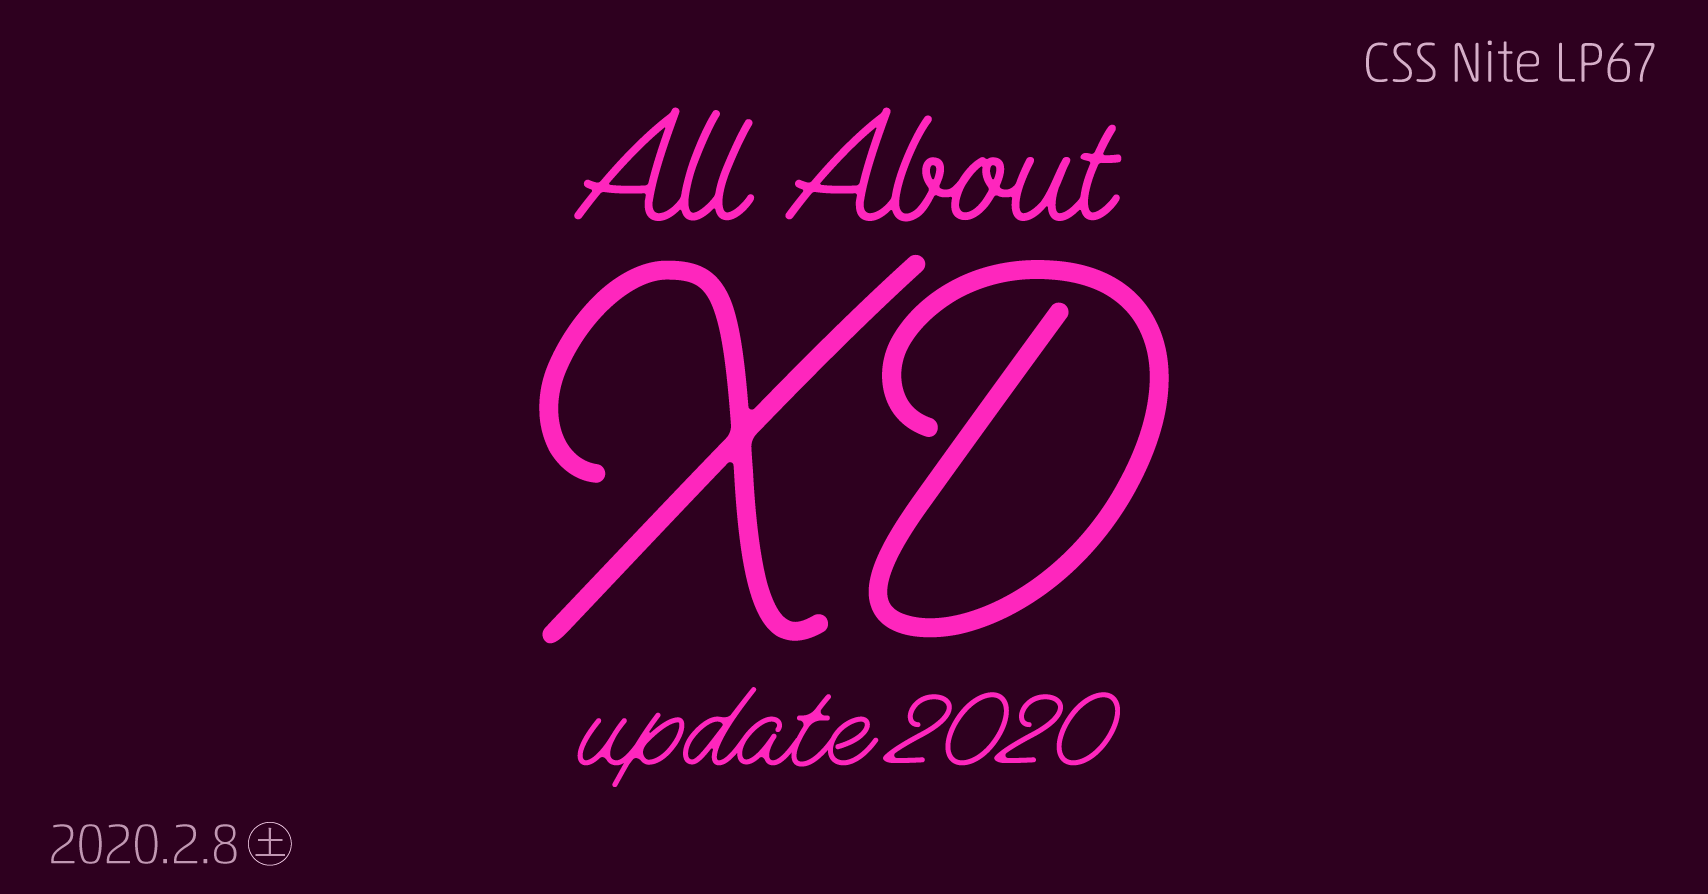 CSS Nite LP67「All About XD (update 2020)」